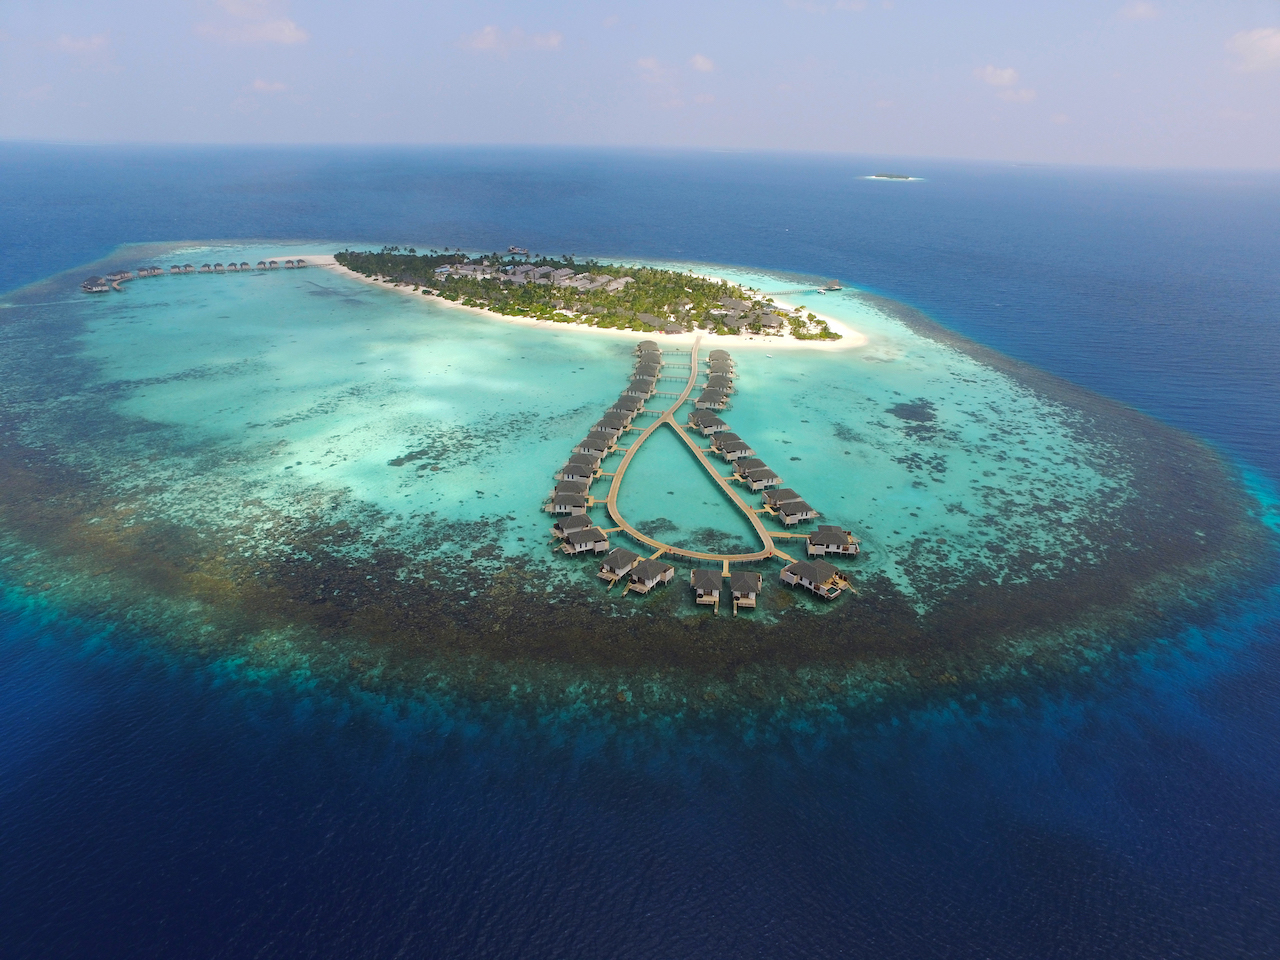 NH Collection Maldives Havodda Resort opens next month as the brand’s first property outside of an urban location. 